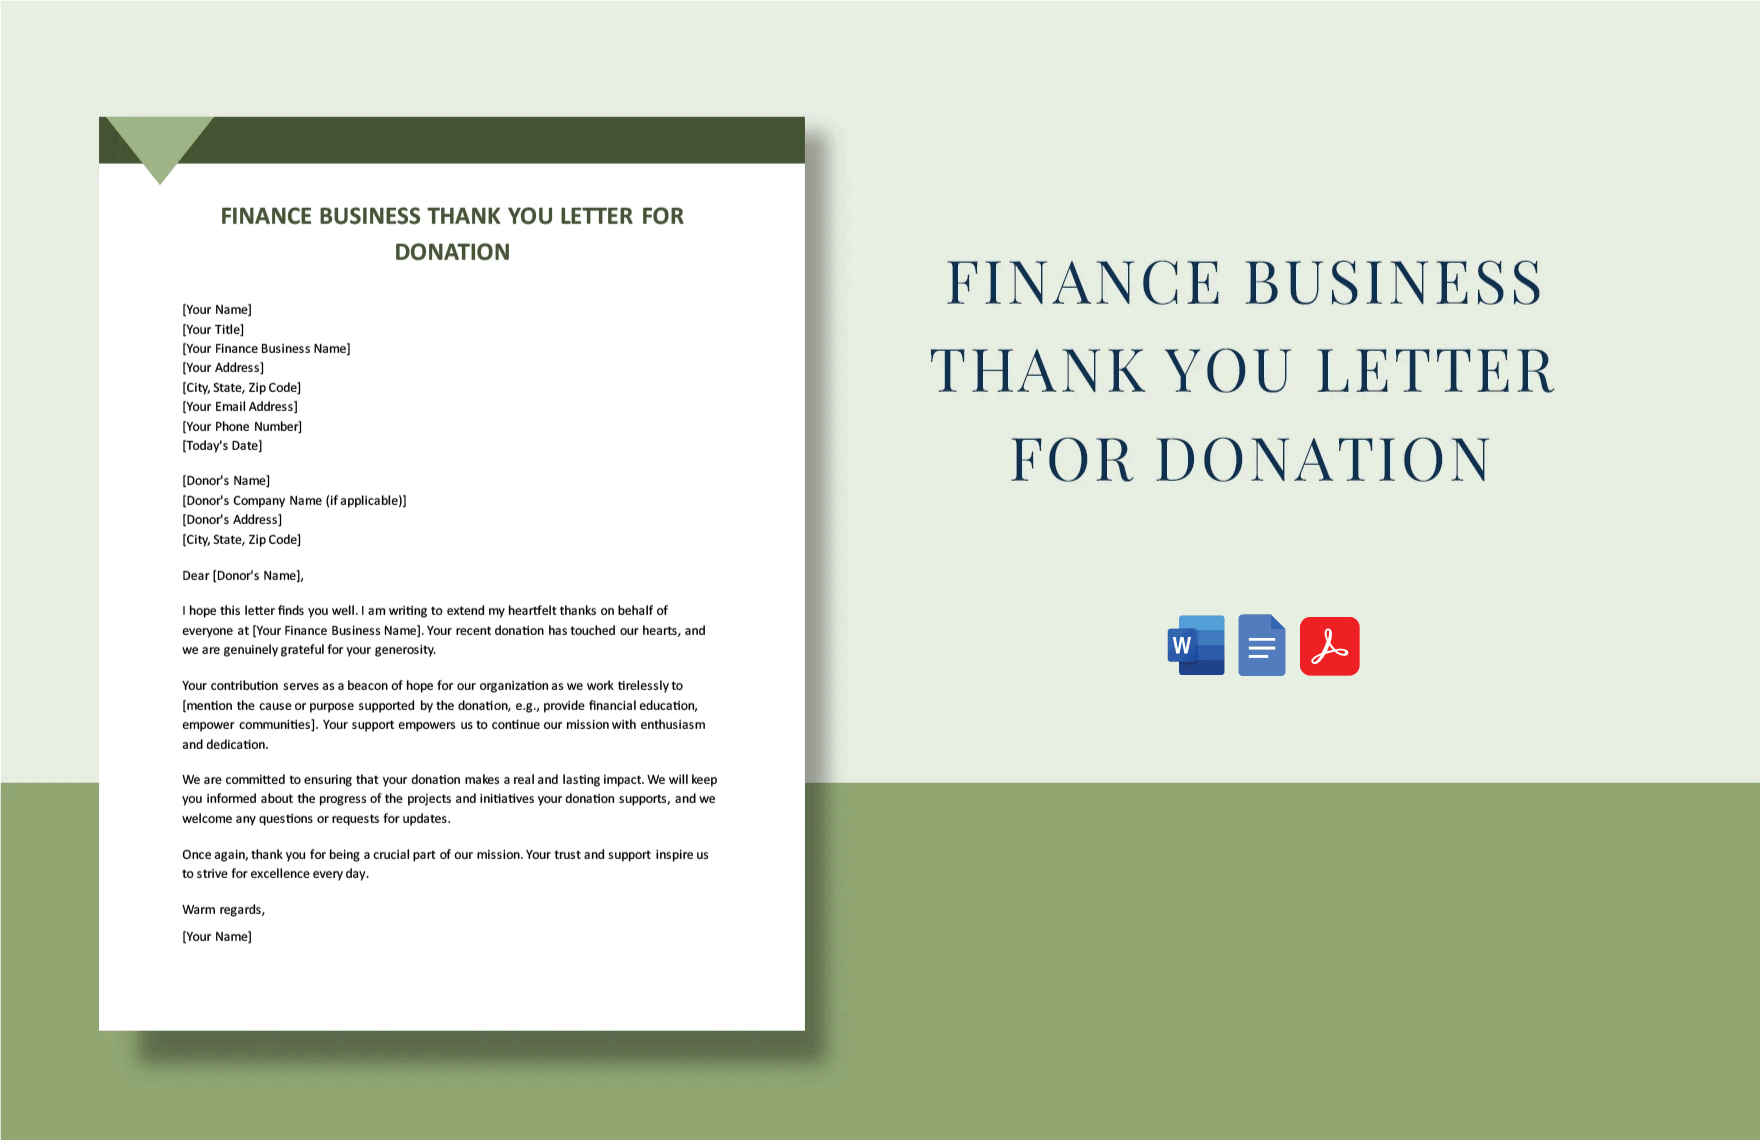 Finance Business Thank You Letter for Donation Template